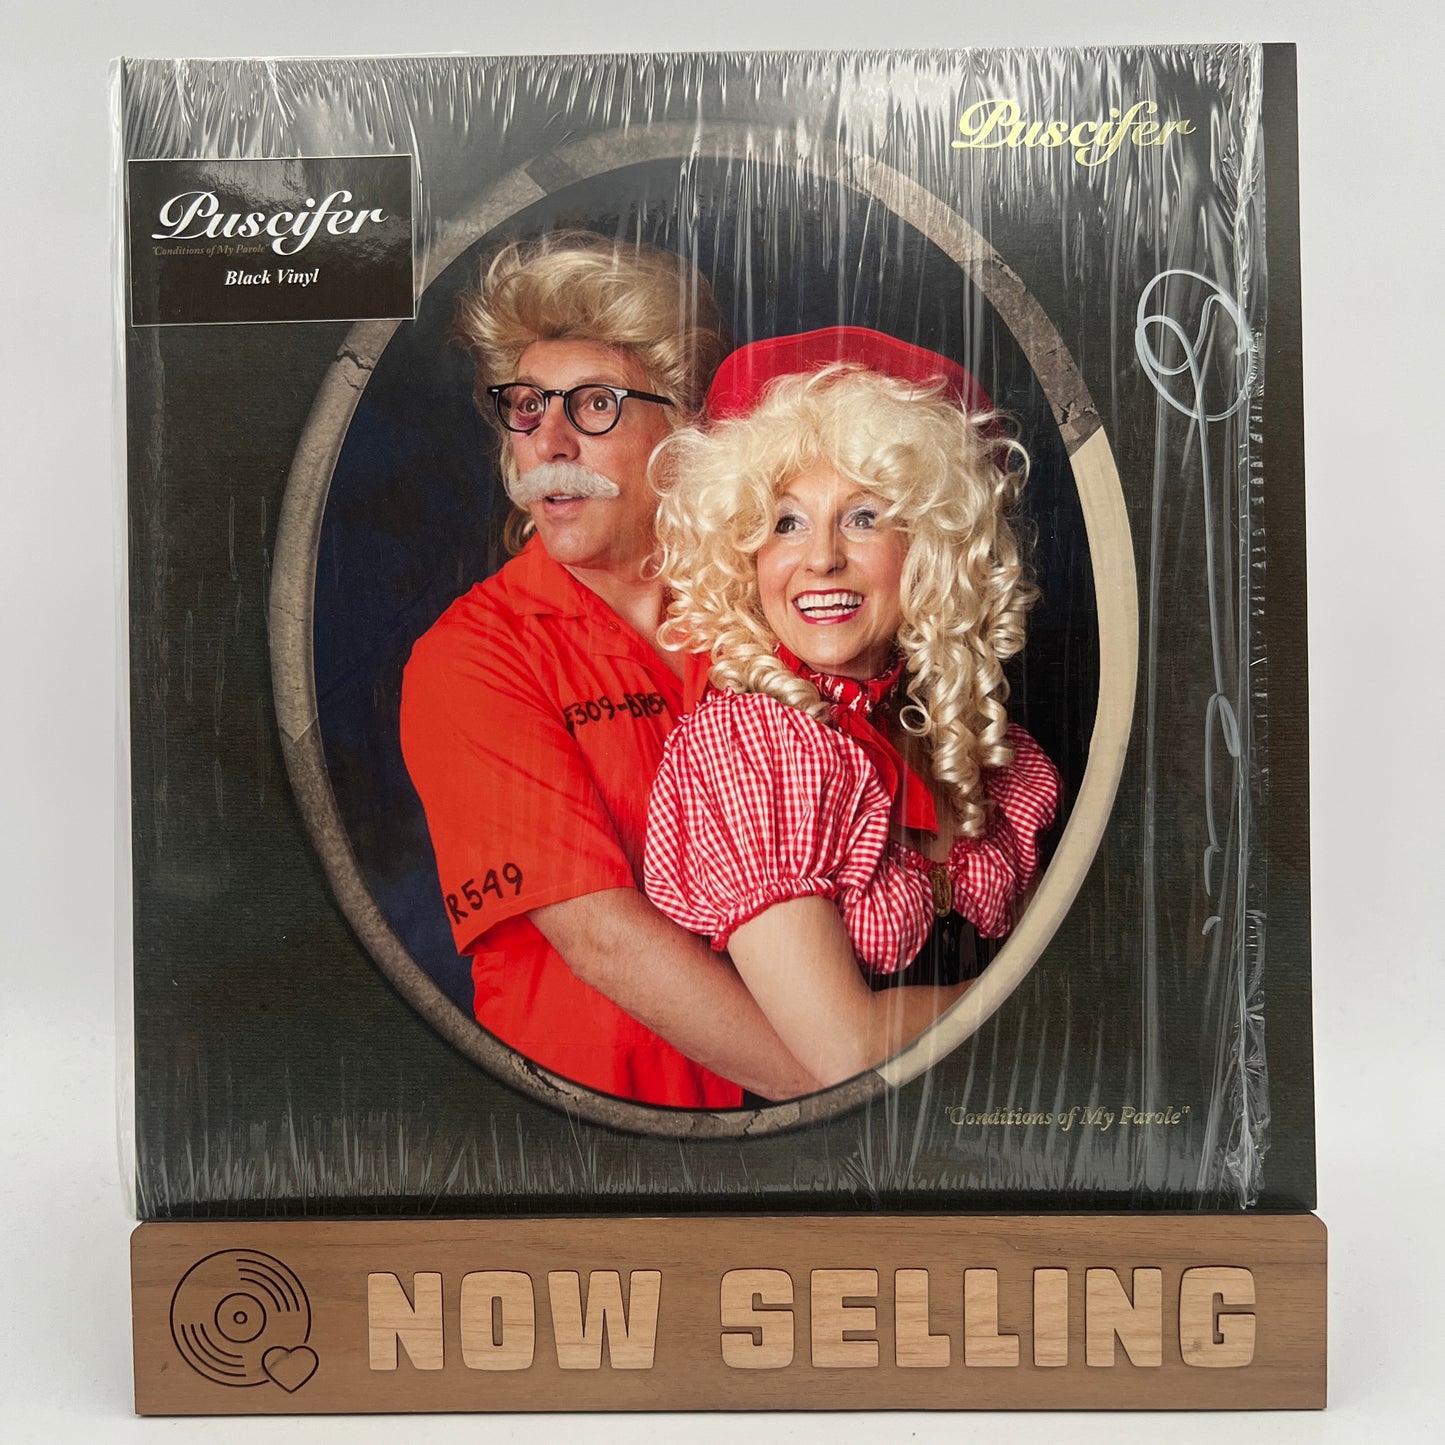 Puscifer - Conditions Of My Parole Vinyl LP Reissue Signed by Carina Round!